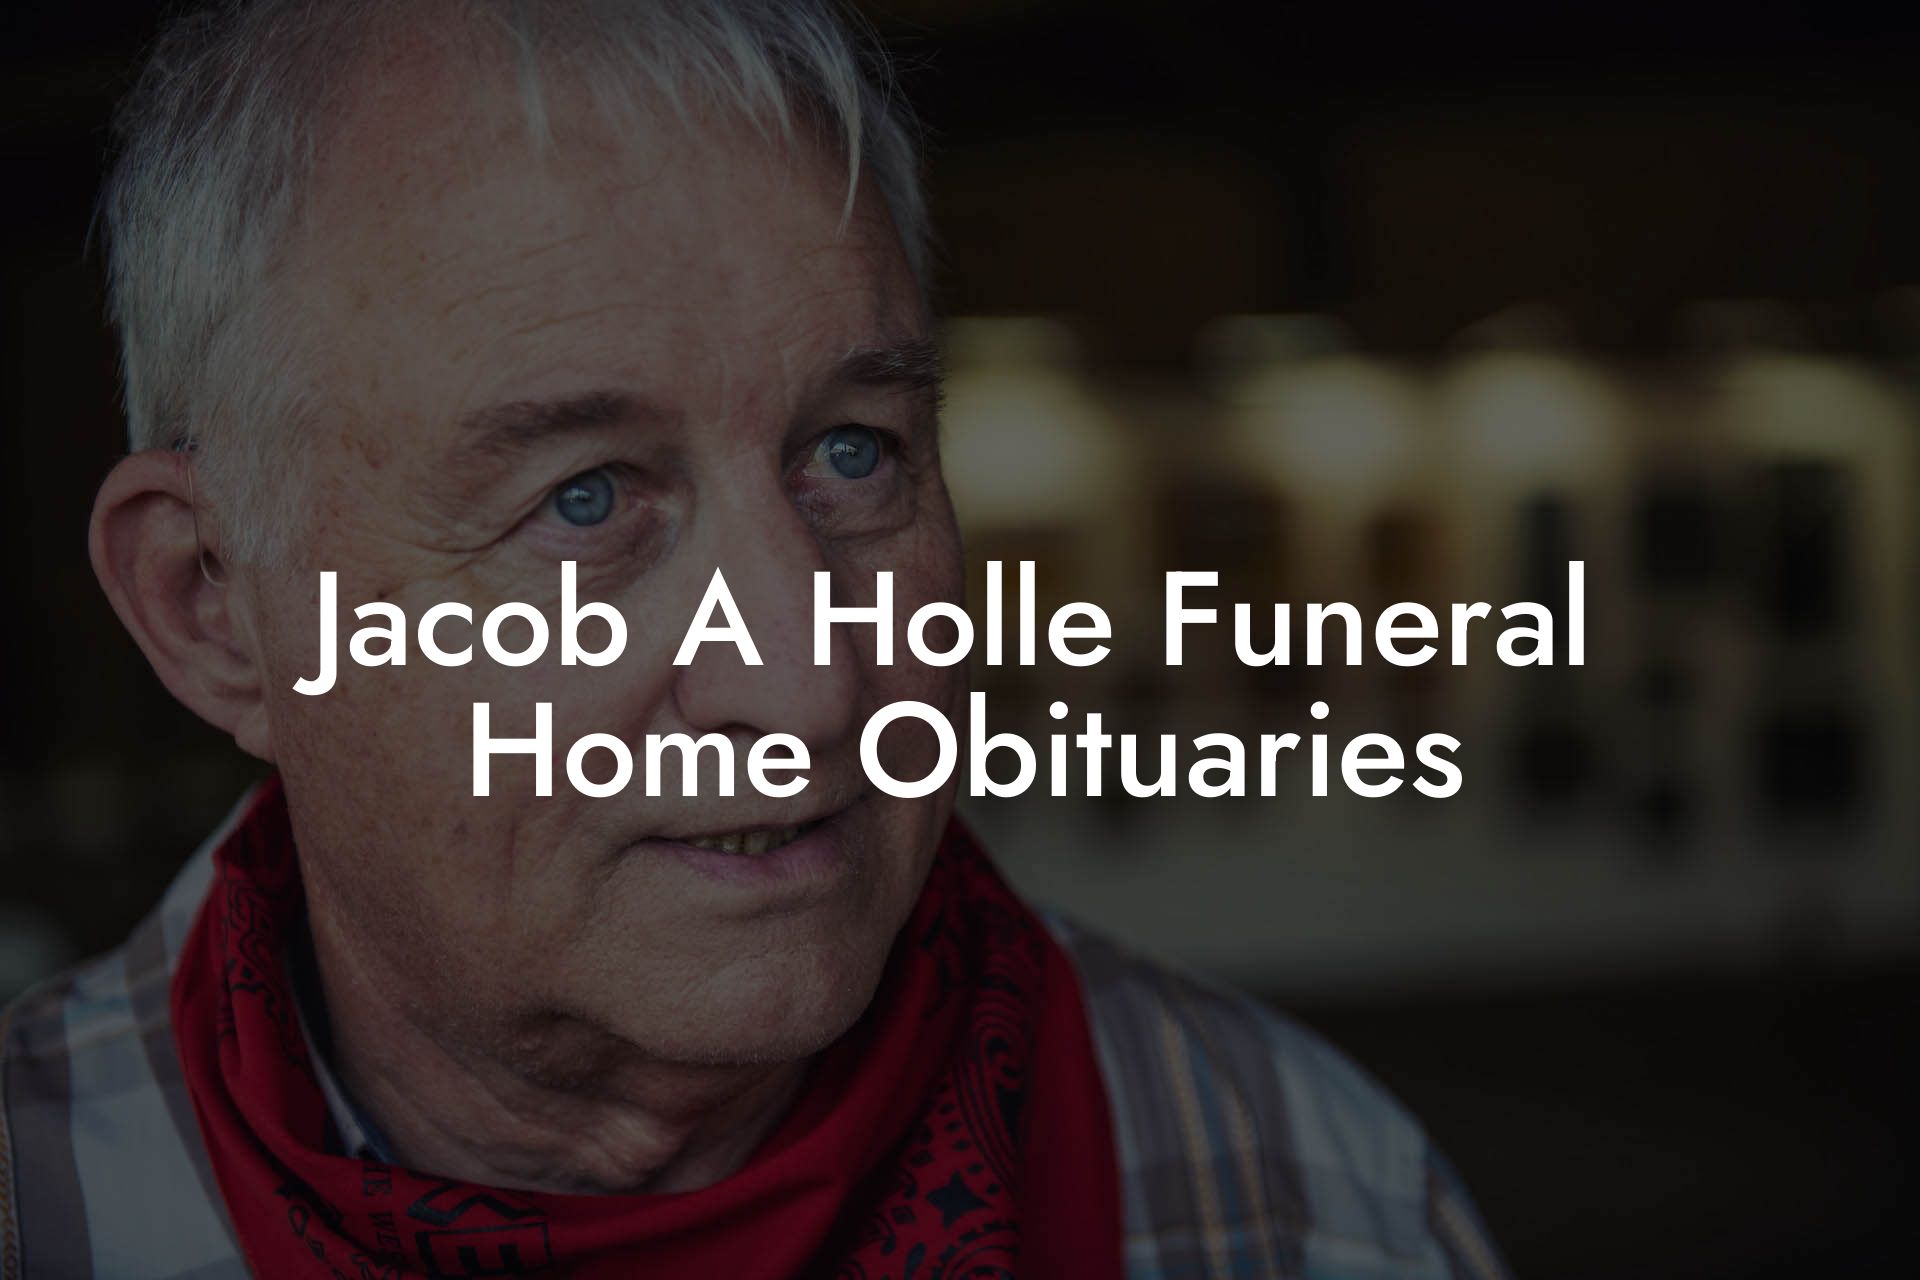 Jacob A. Holle Funeral Home Obituaries